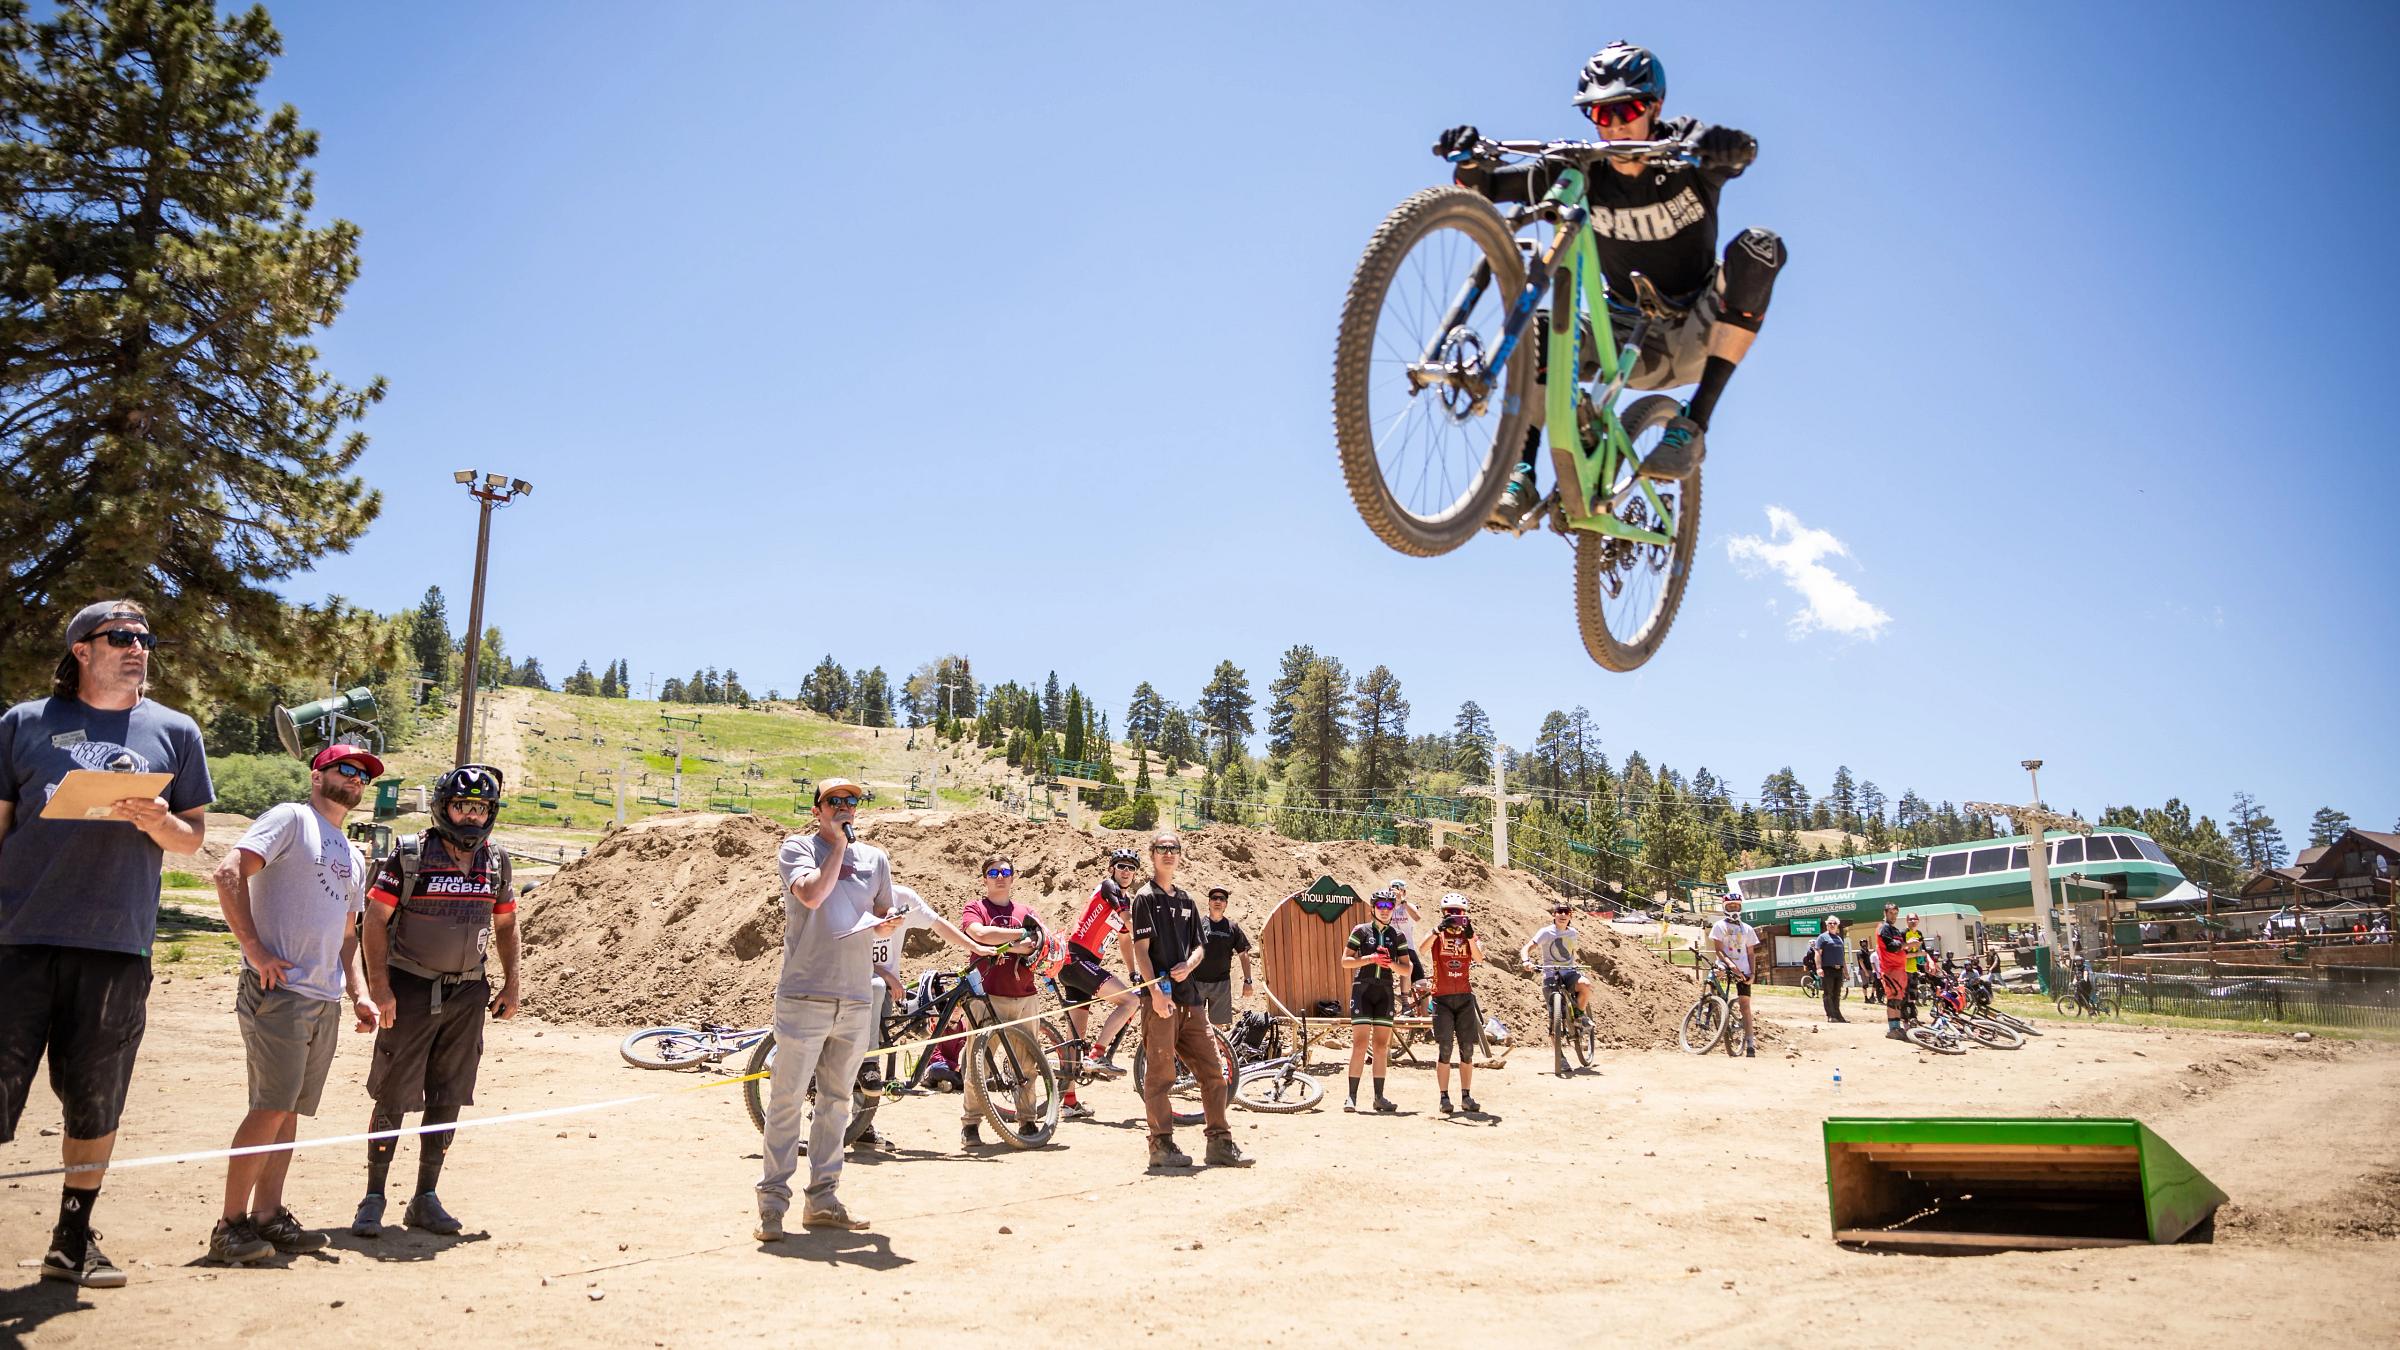 Mountain biker participating in a long jump competition